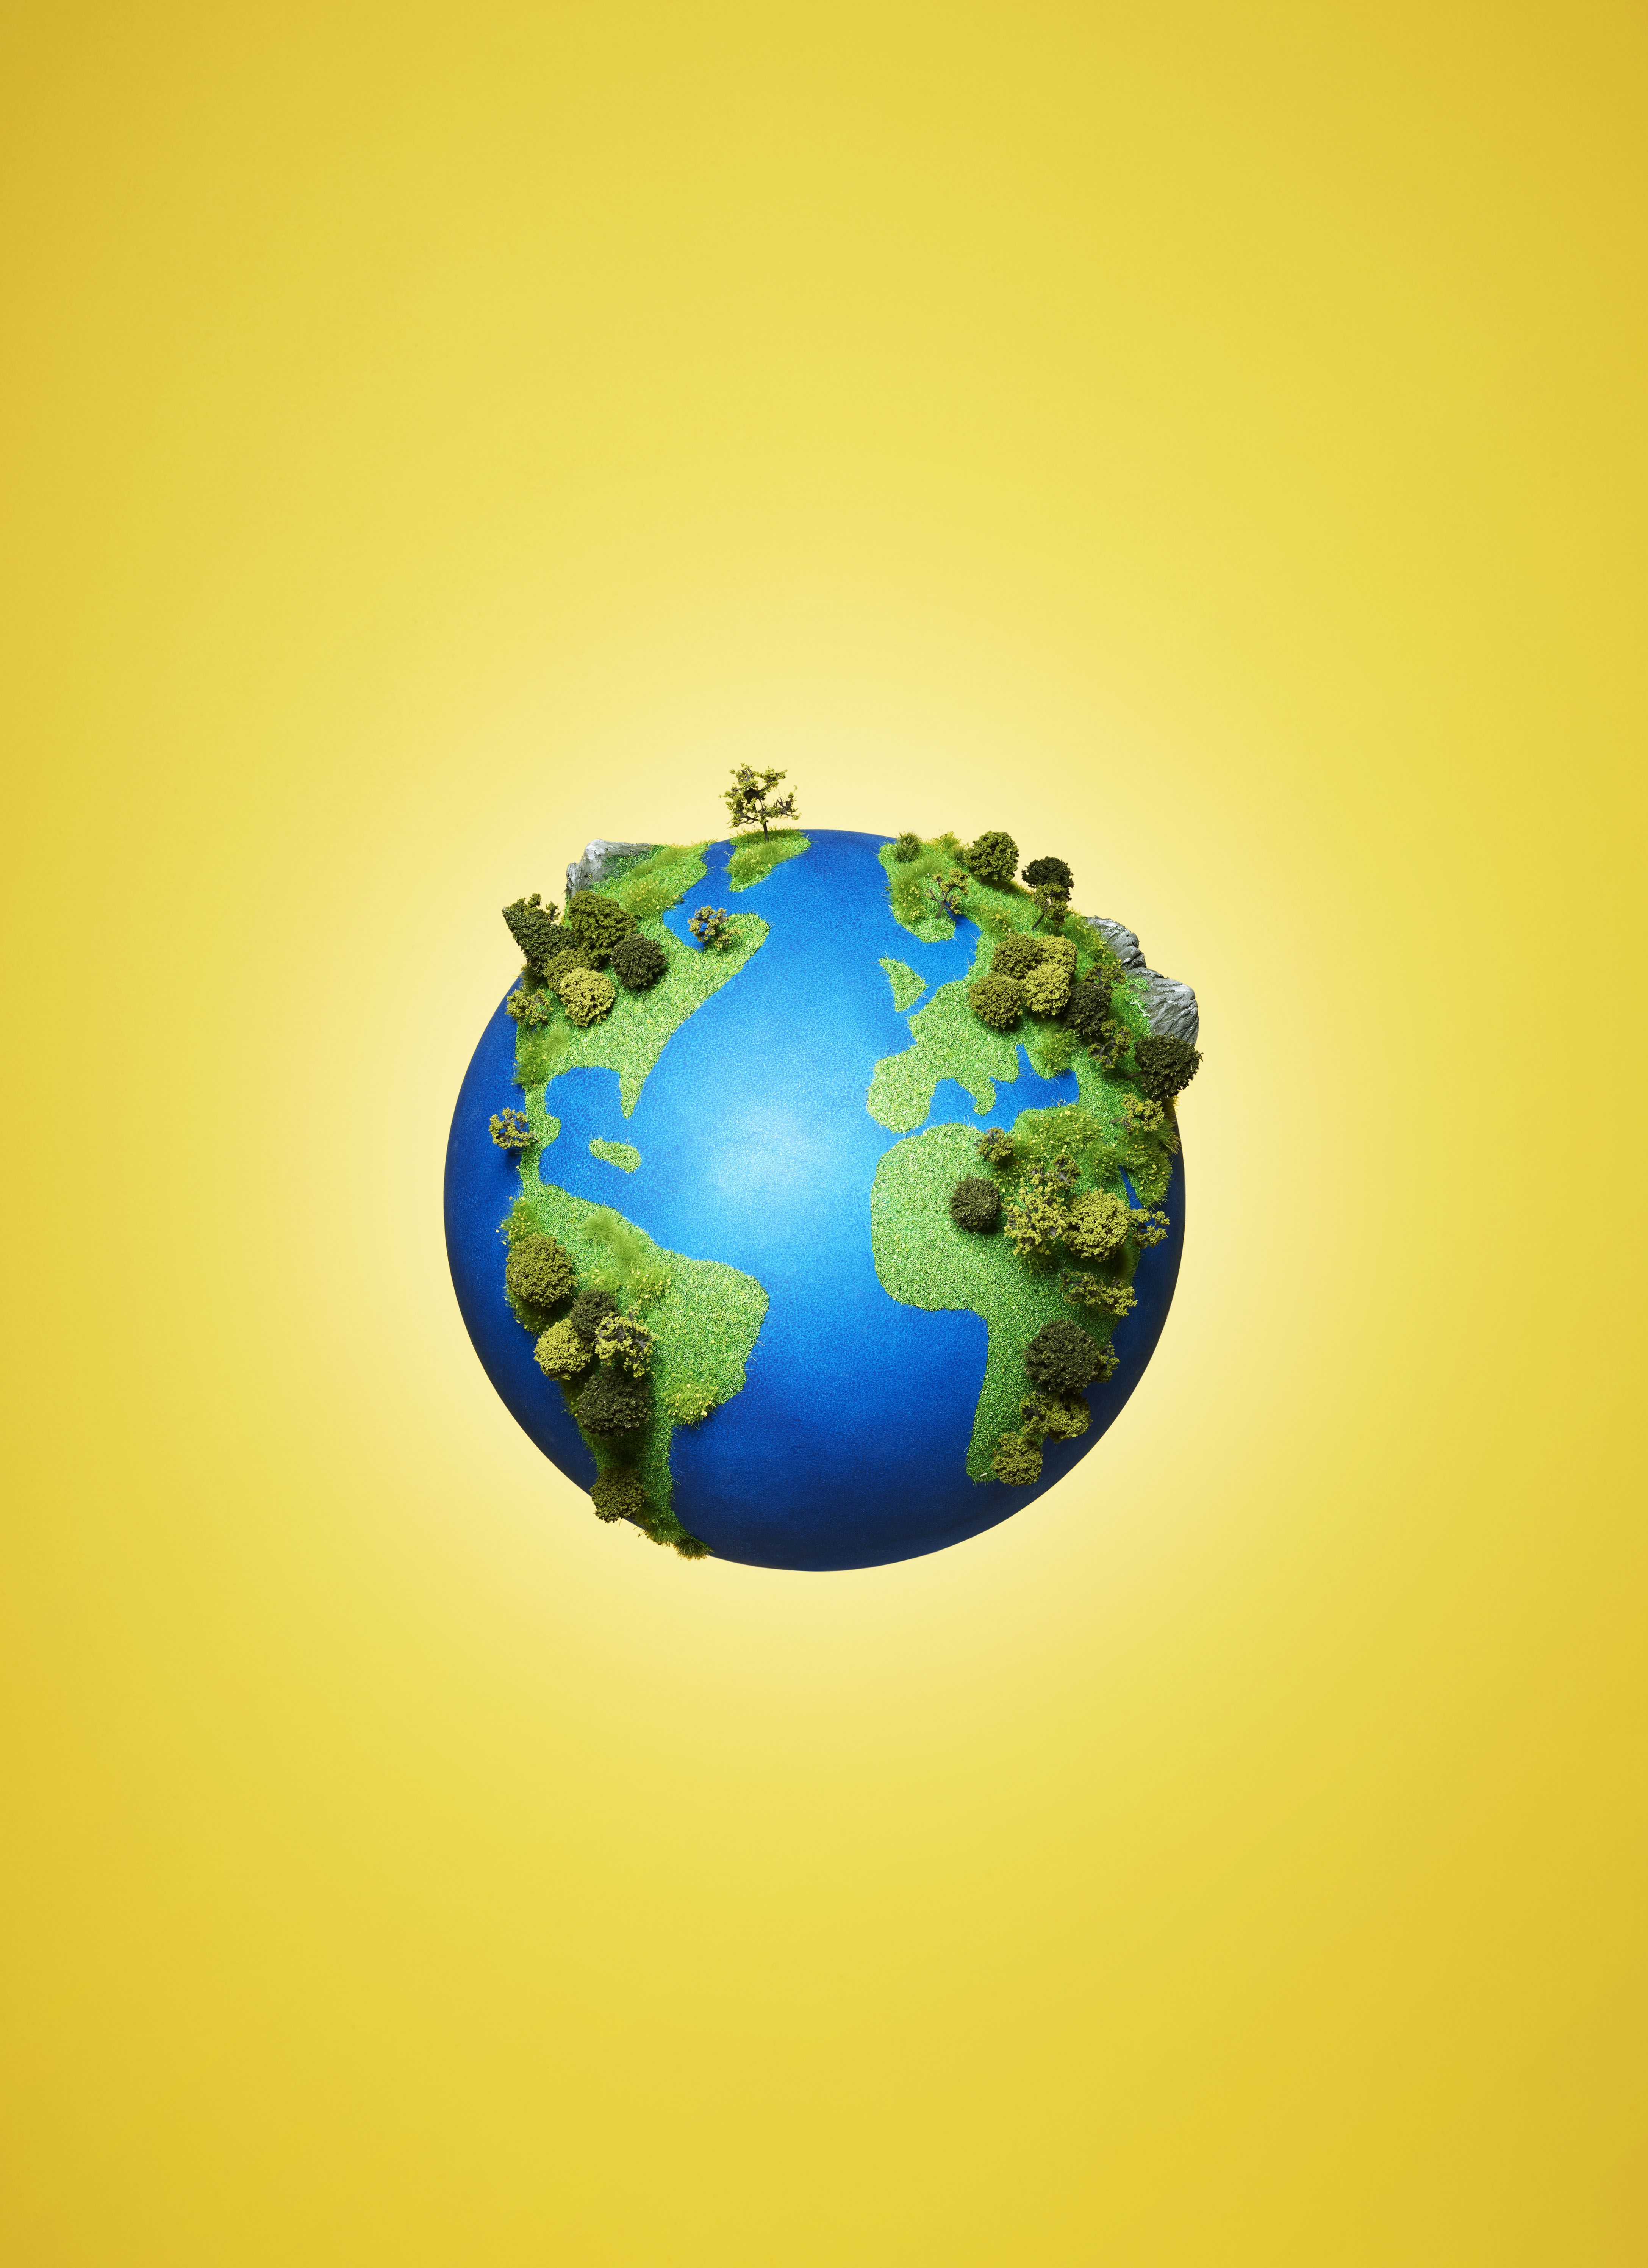 What Is Climate Change - 7 Ways to Help Save the Planet